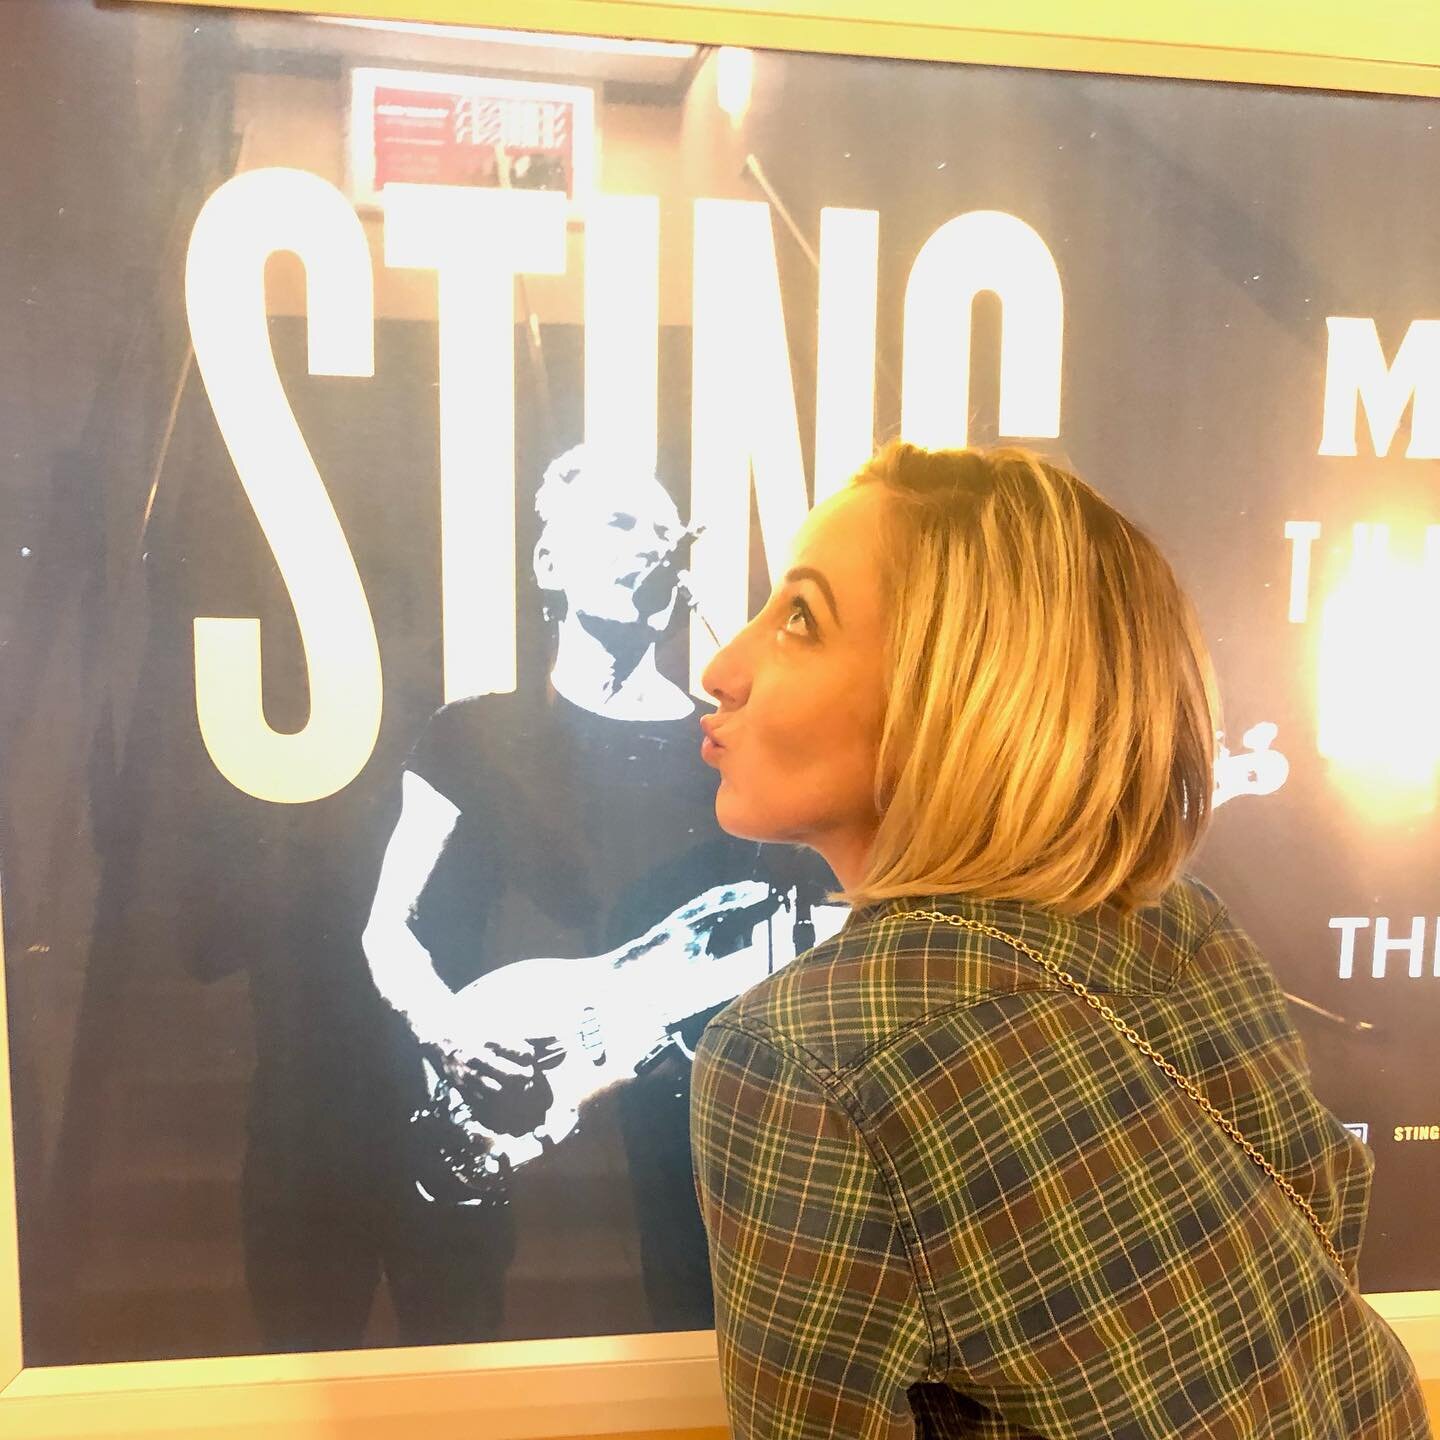 @Last night in Vegas, @theofficialsting put on one of the very best shows I&rsquo;ve ever seen. Every little thing he does is literal magic. ✨

#sting #stingmysongs #stingmysongstour